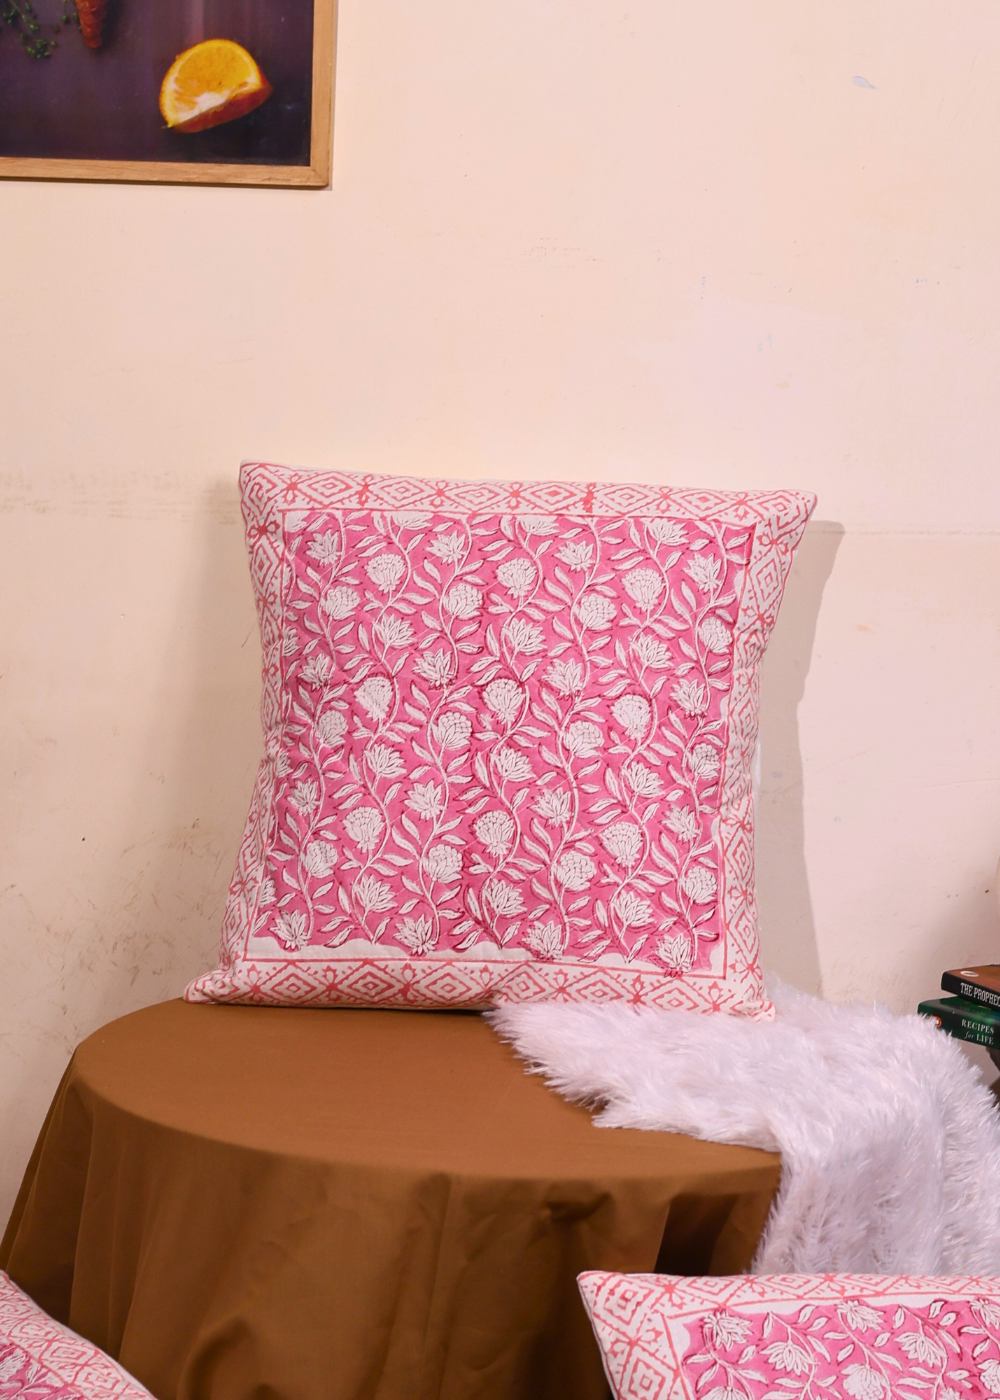 Hand crafted cushion cover